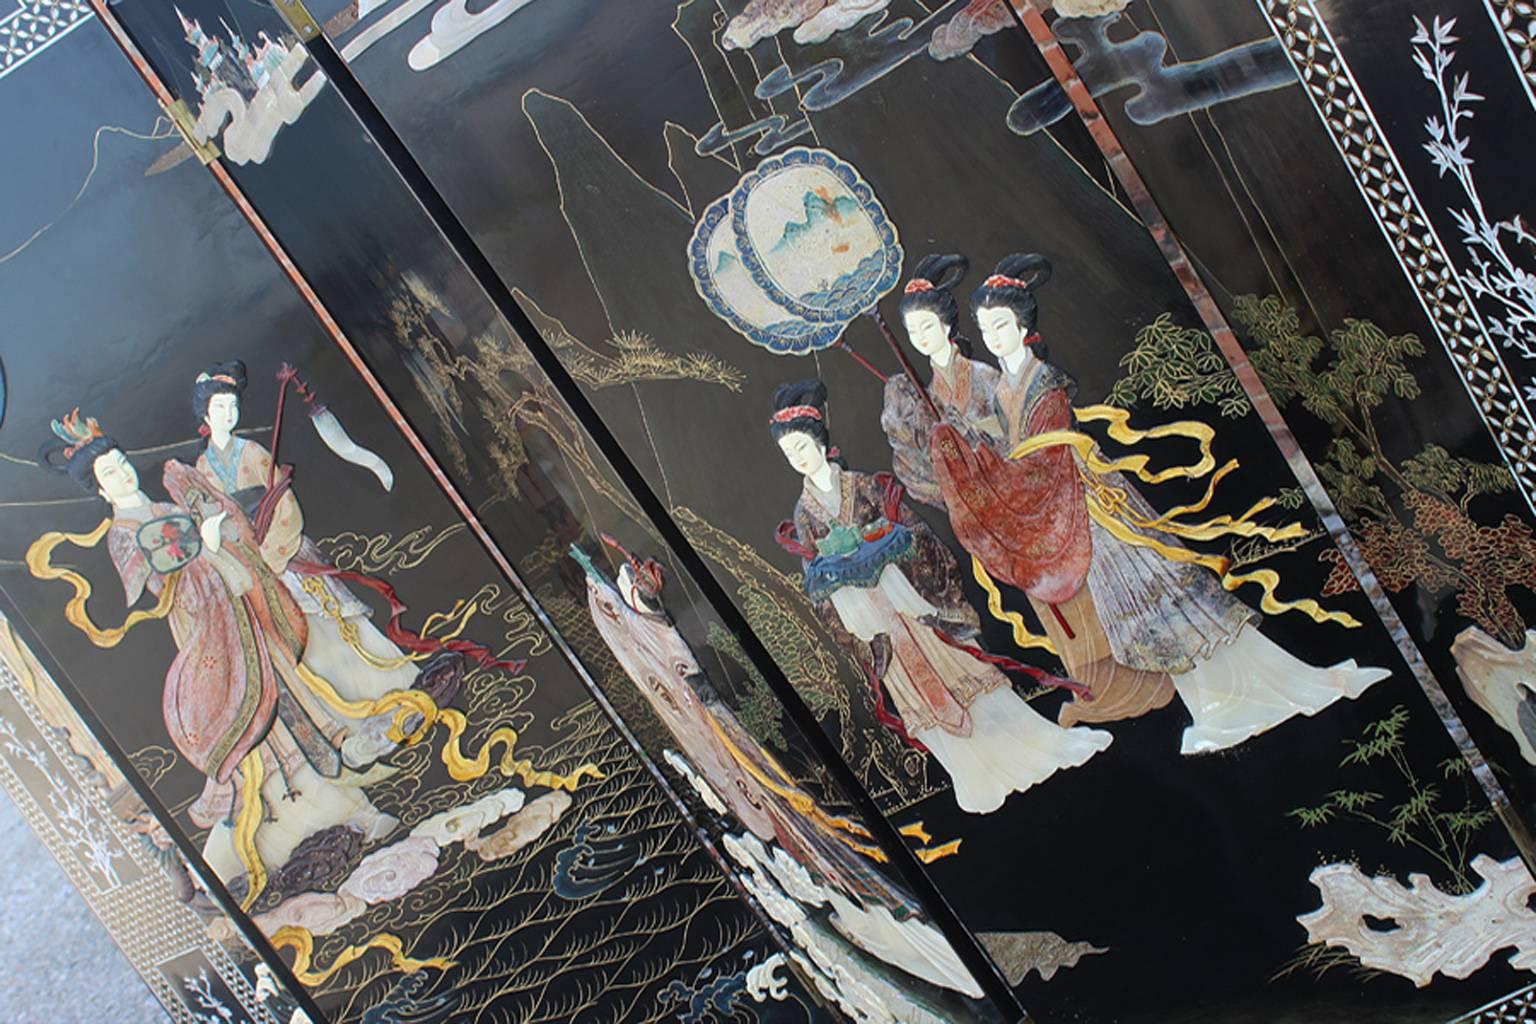 Gorgeous six-panel Asian black lacquered or ebonized folding screen with hardstone and jade carvings. In wonderful vintage age appropriate condition. We did find a few chips to the lacquer – see photos.

You must have this magnificent vintage